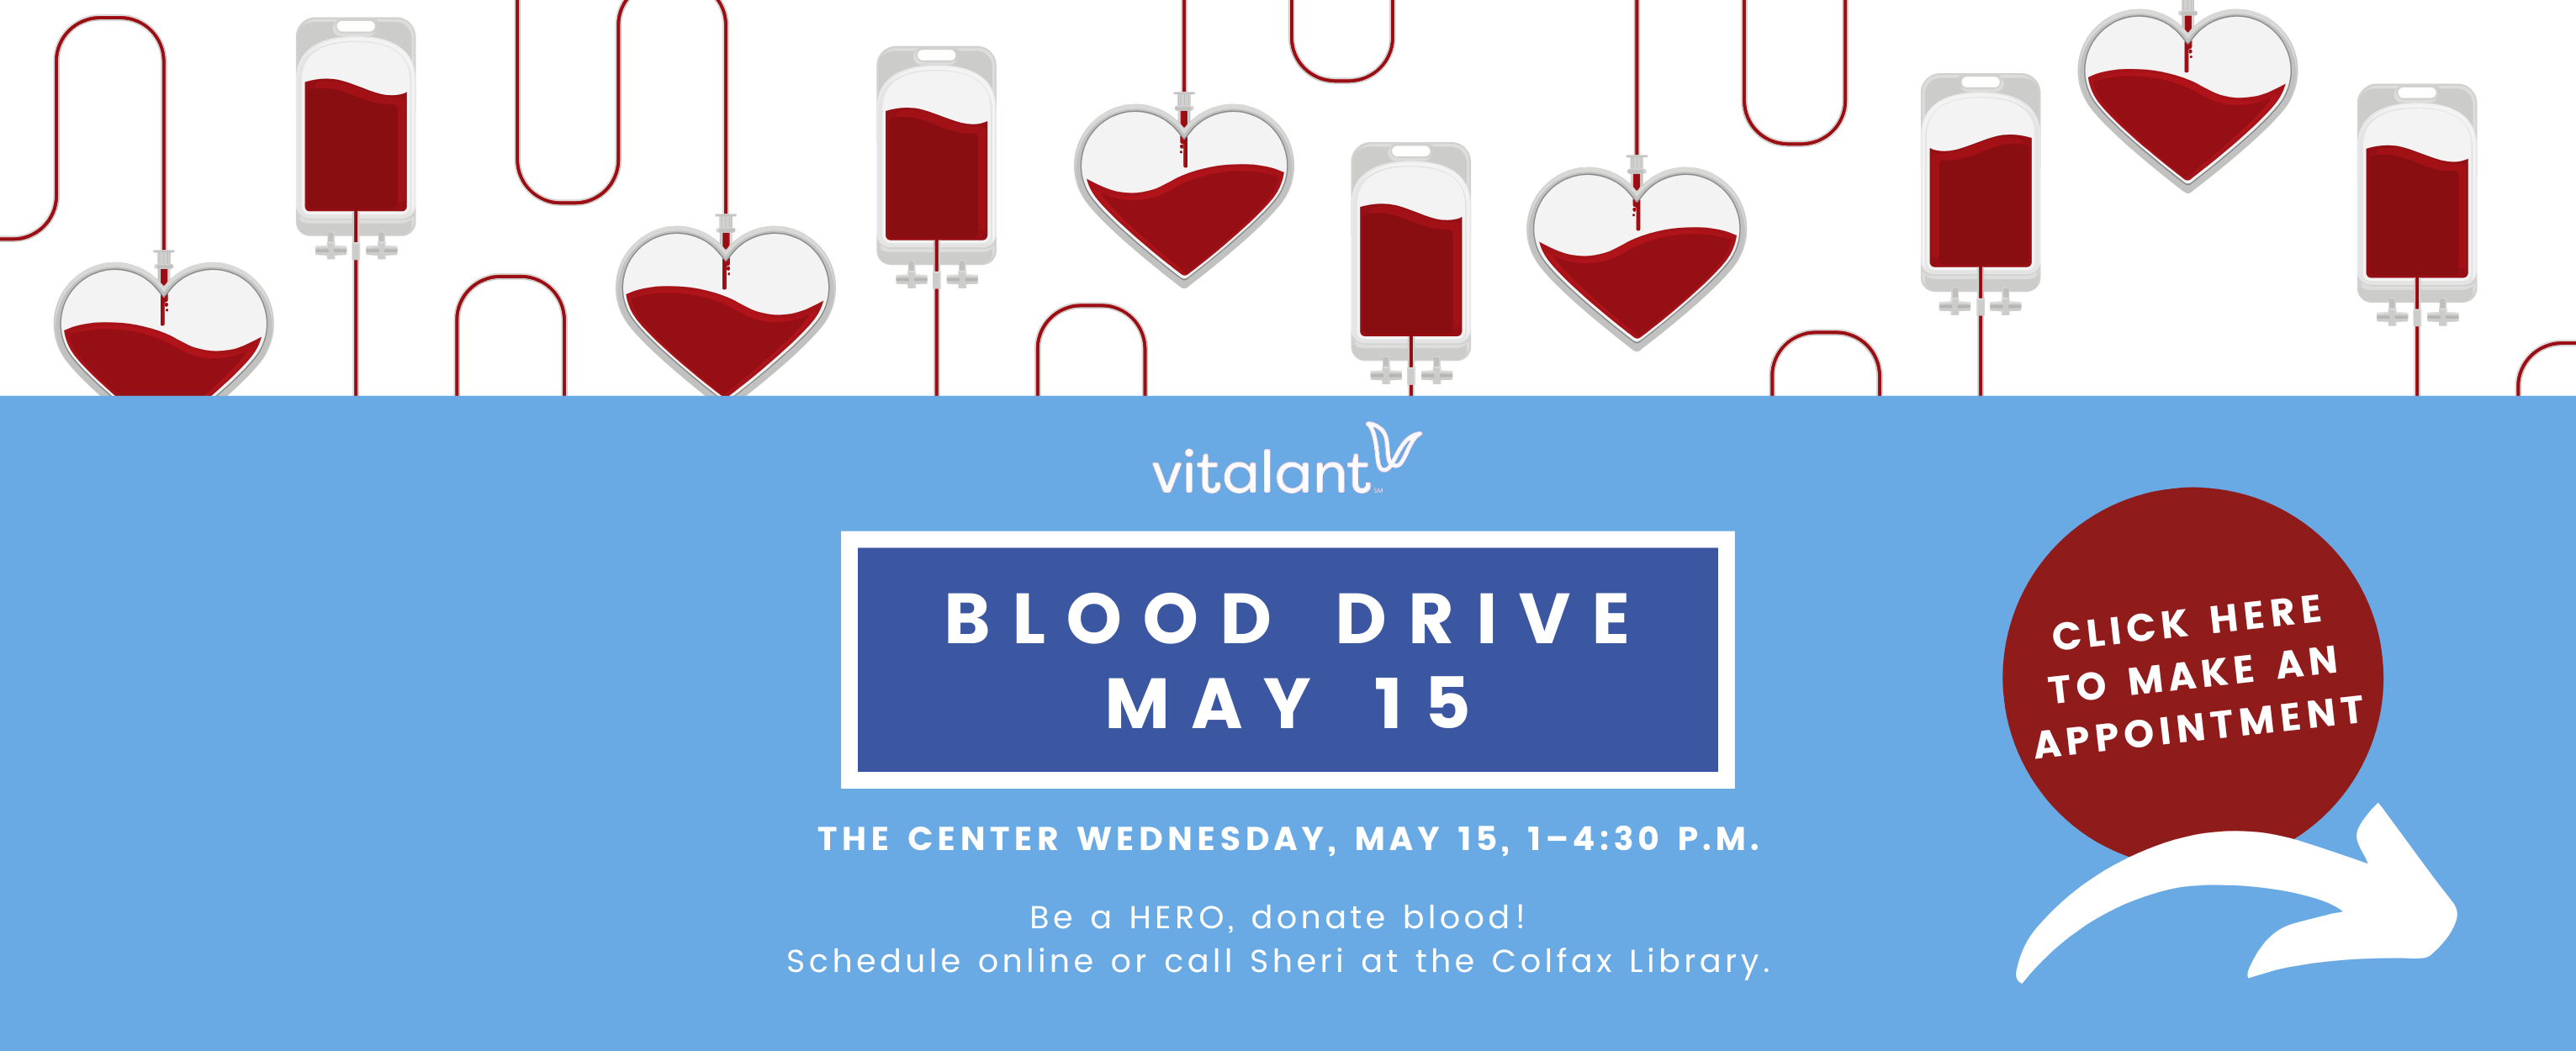 Click here to make an appointment for our upcoming blood drive on Wednesday, May 15 by clicking here and scheduling a time between 1-4:30 PM.